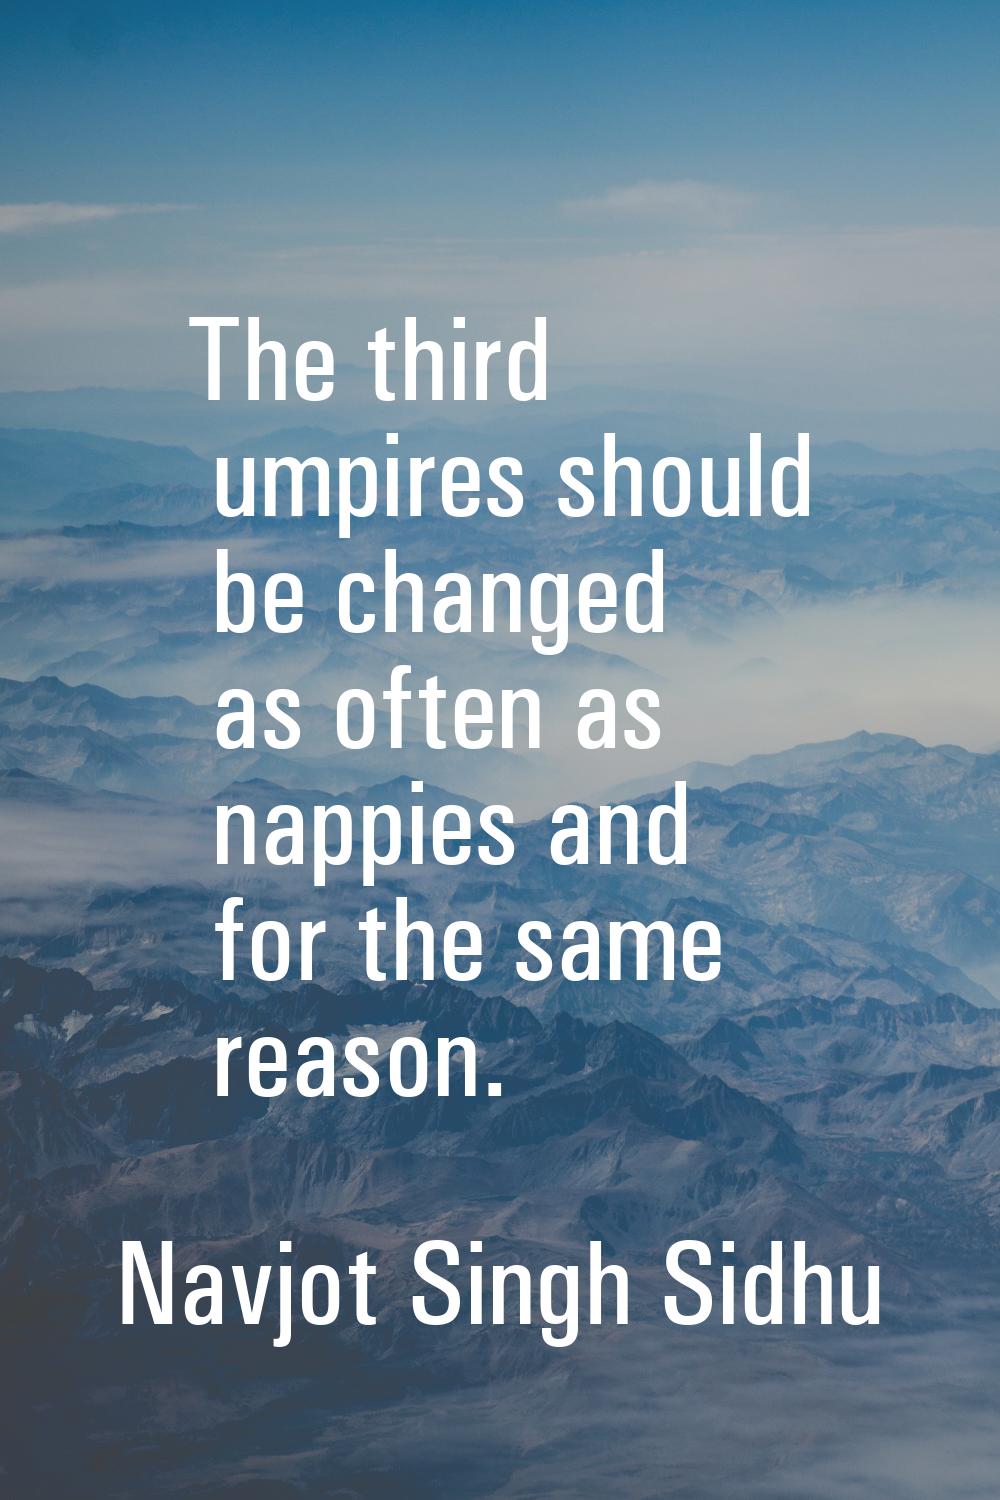 The third umpires should be changed as often as nappies and for the same reason.